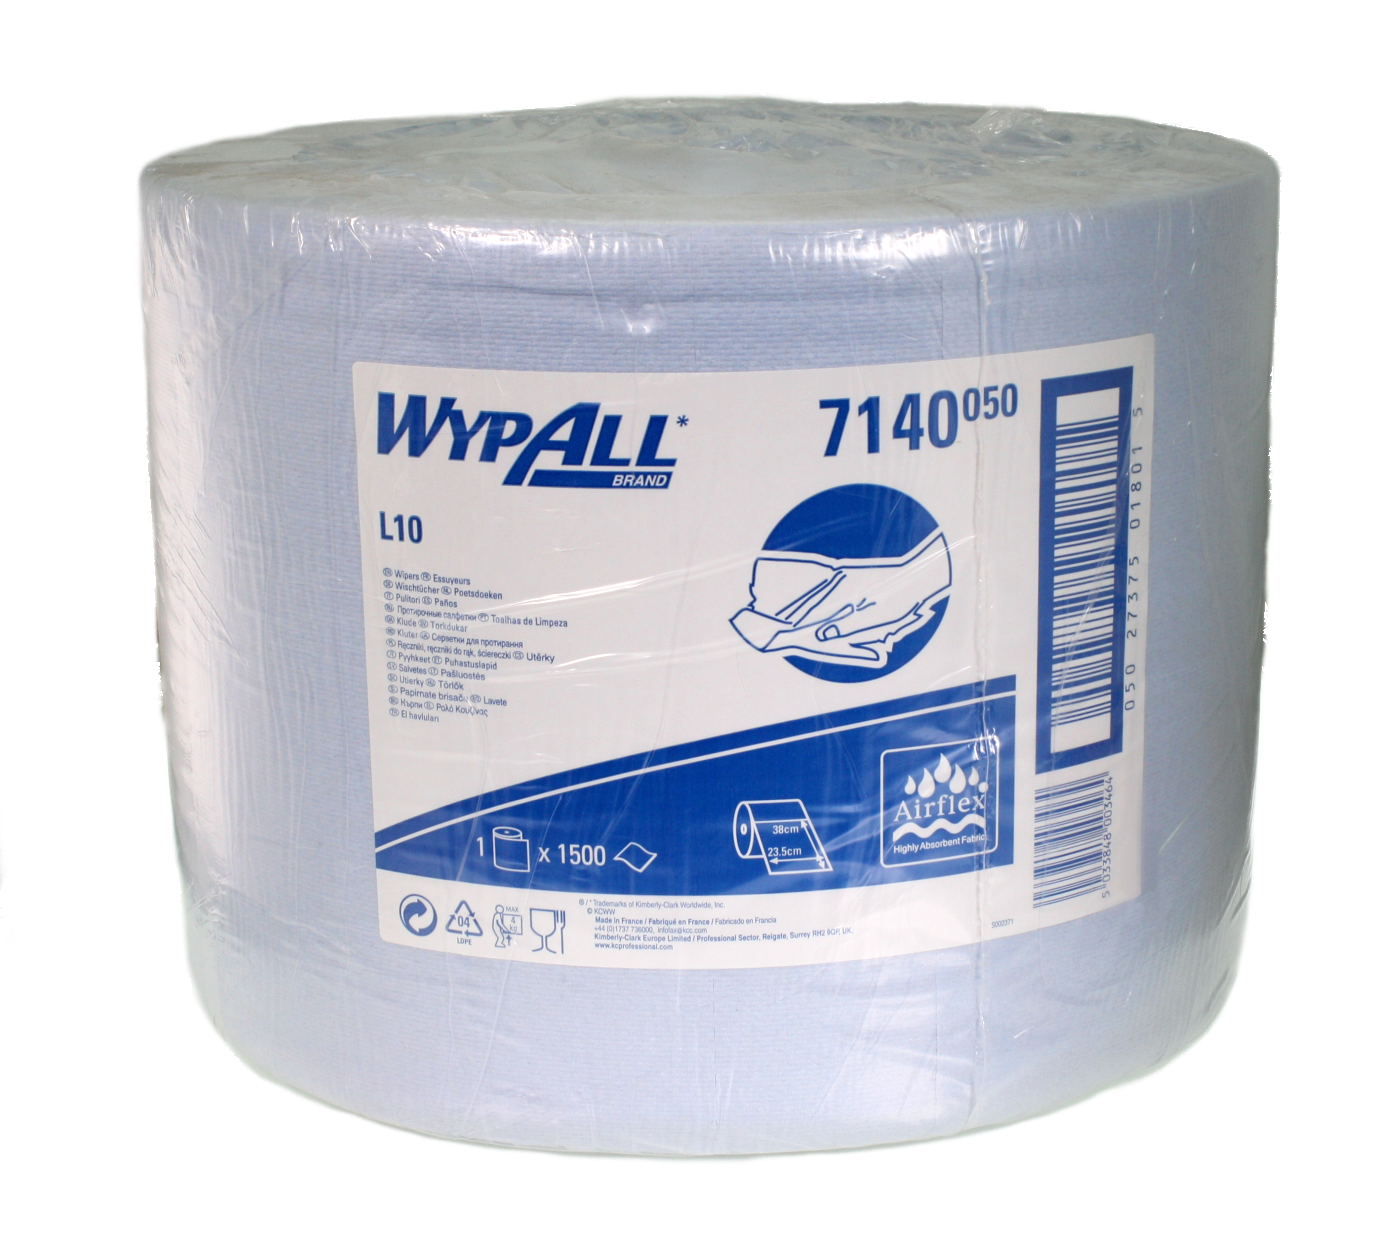 A roll of Wypall